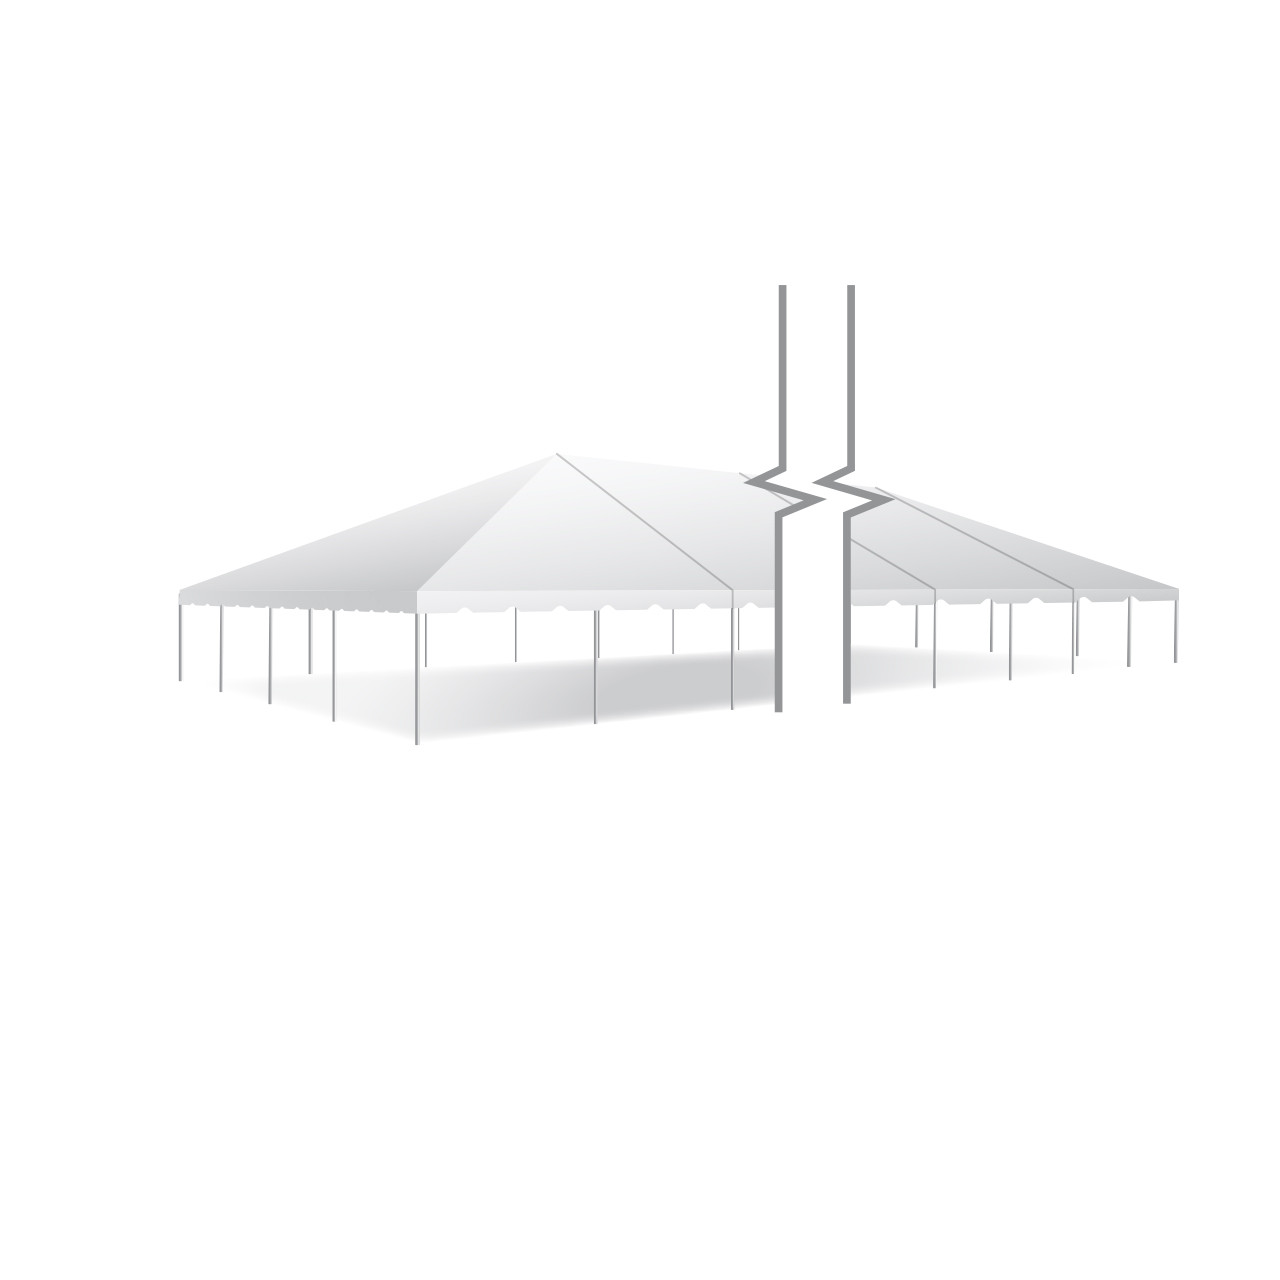 40' x 120' Classic Series Frame Tent, Sectional Tent Top, Complete